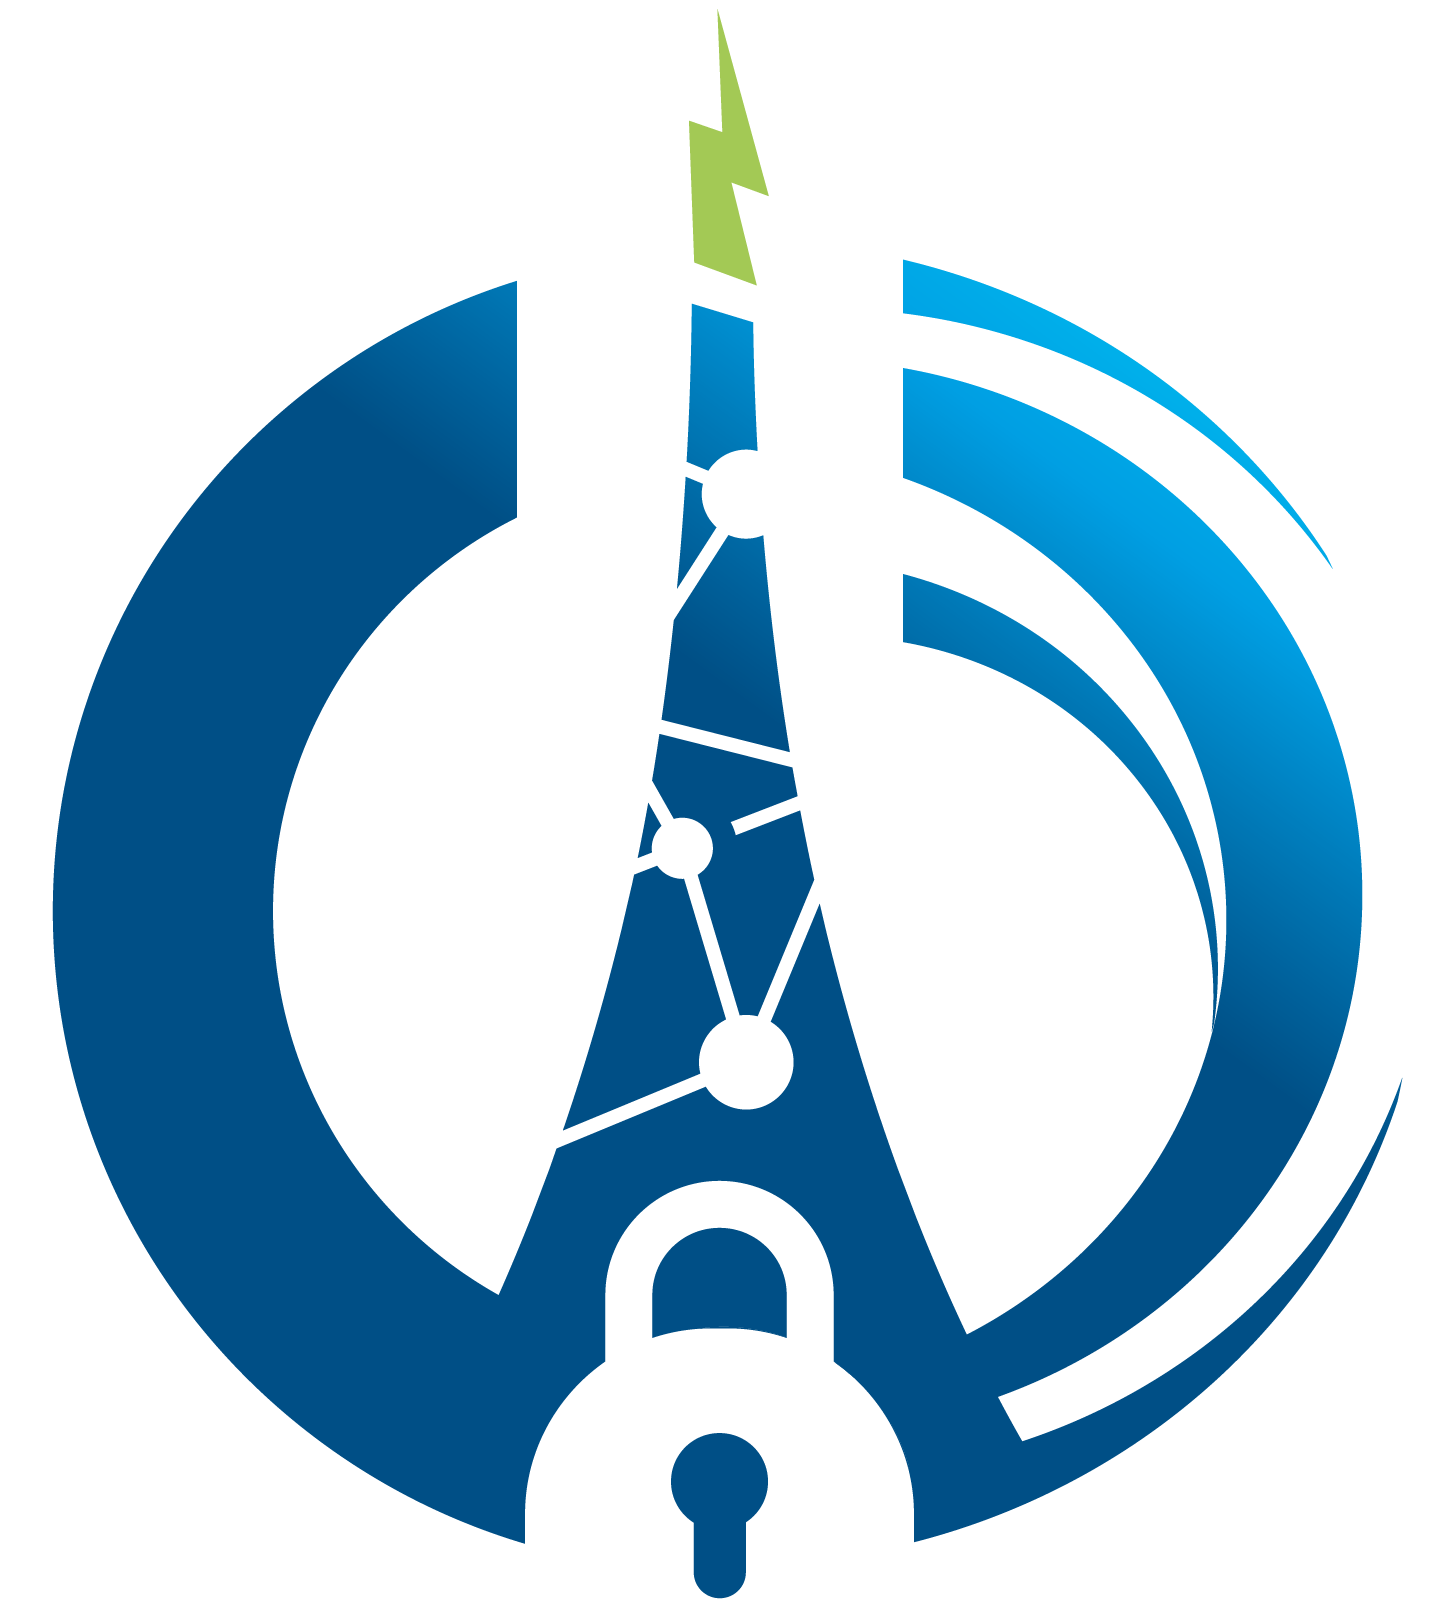 Hack In Paris February 15th To 19th 2021